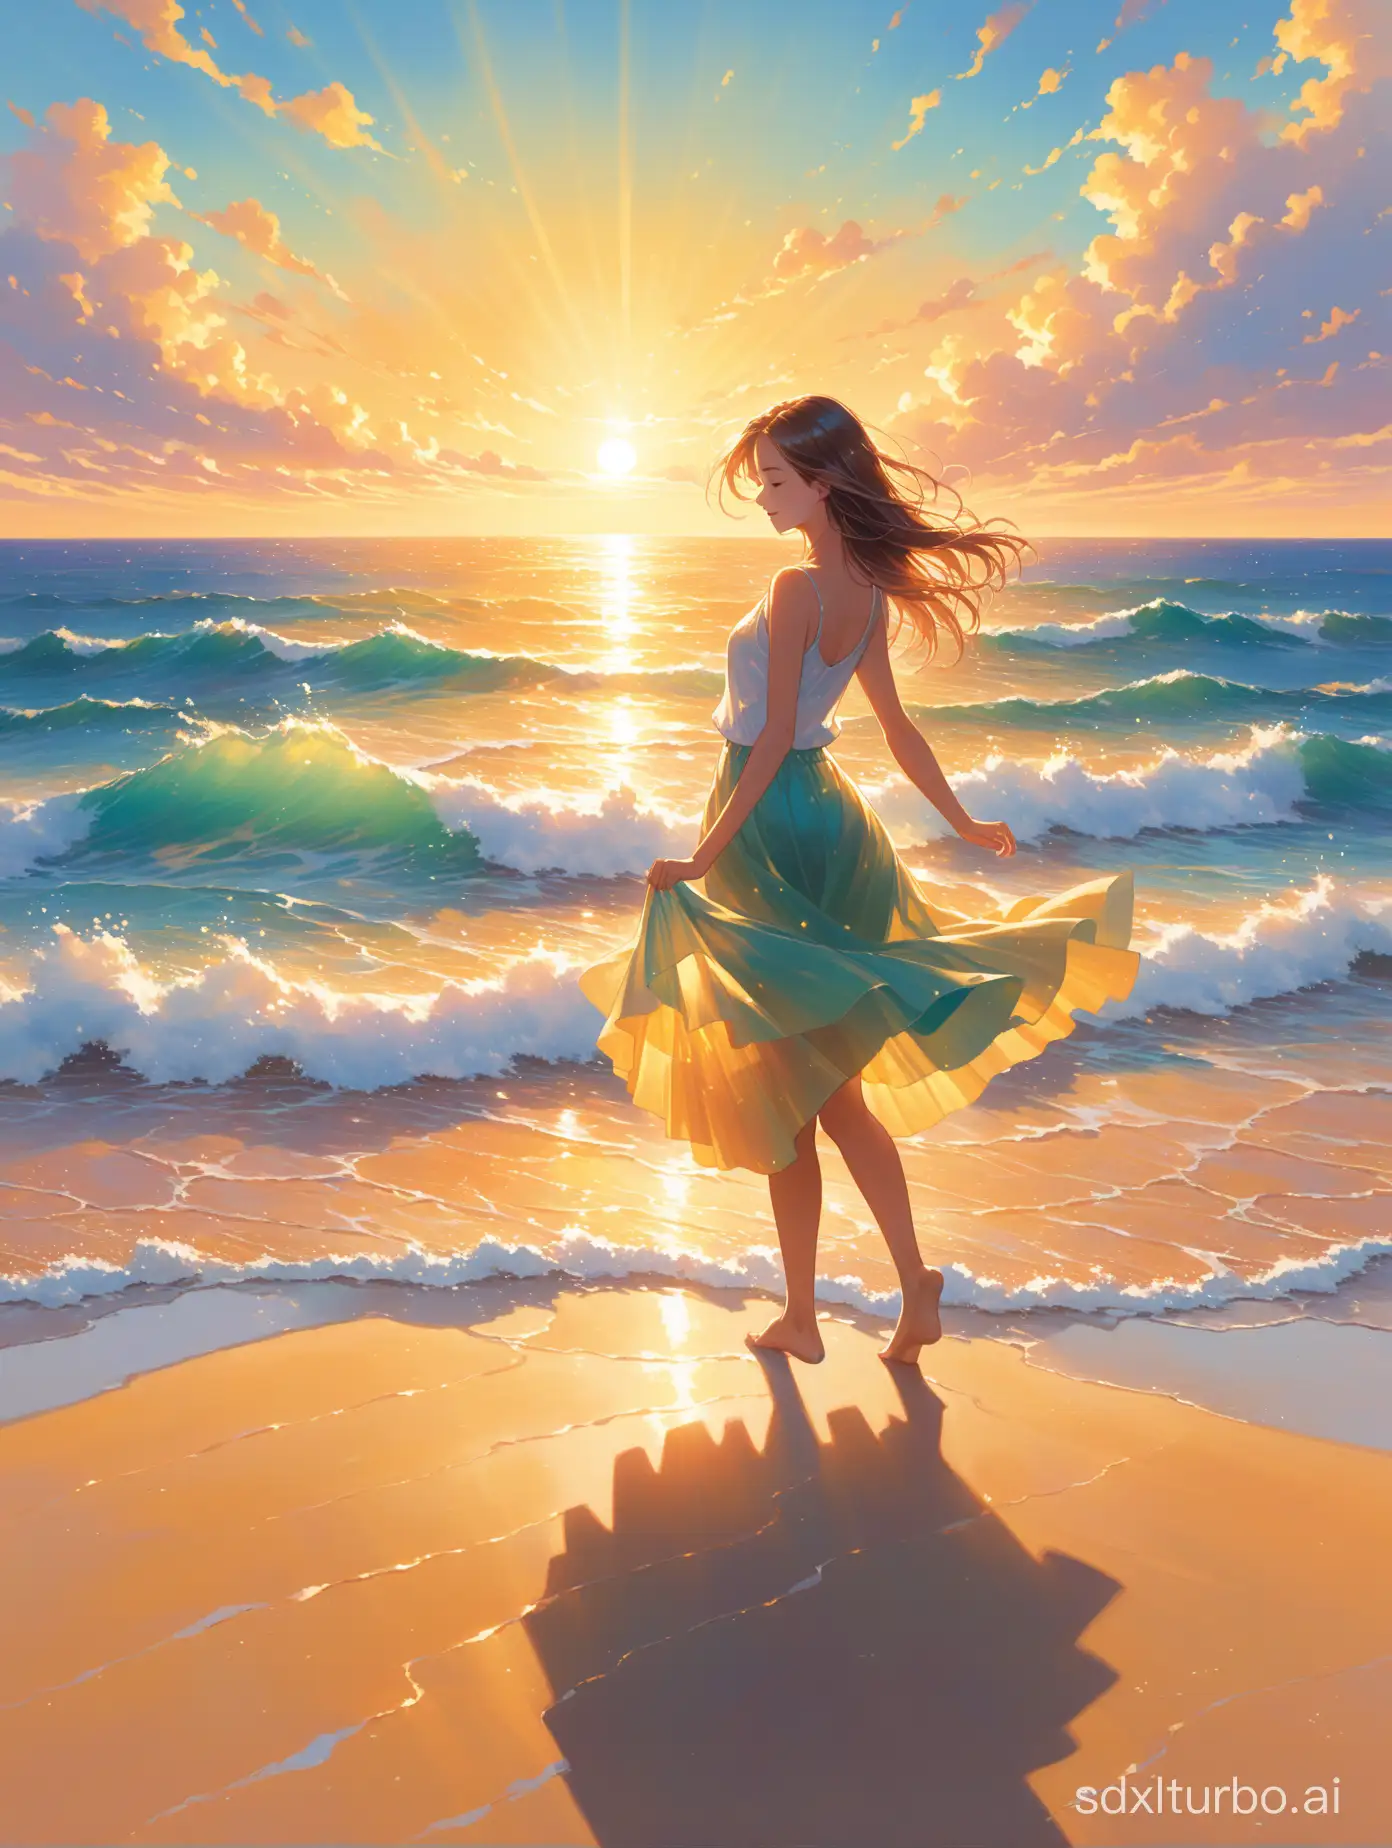 Beachside Steps - The cover features the girl standing on the beach, dancing lightly to the rhythm of the waves. Her skirt flutters in the sea breeze, with the background being a seascape at sunset, sunlight filtering through the clouds and casting golden rays onto the ocean surface, presenting a vivid coastal painting.